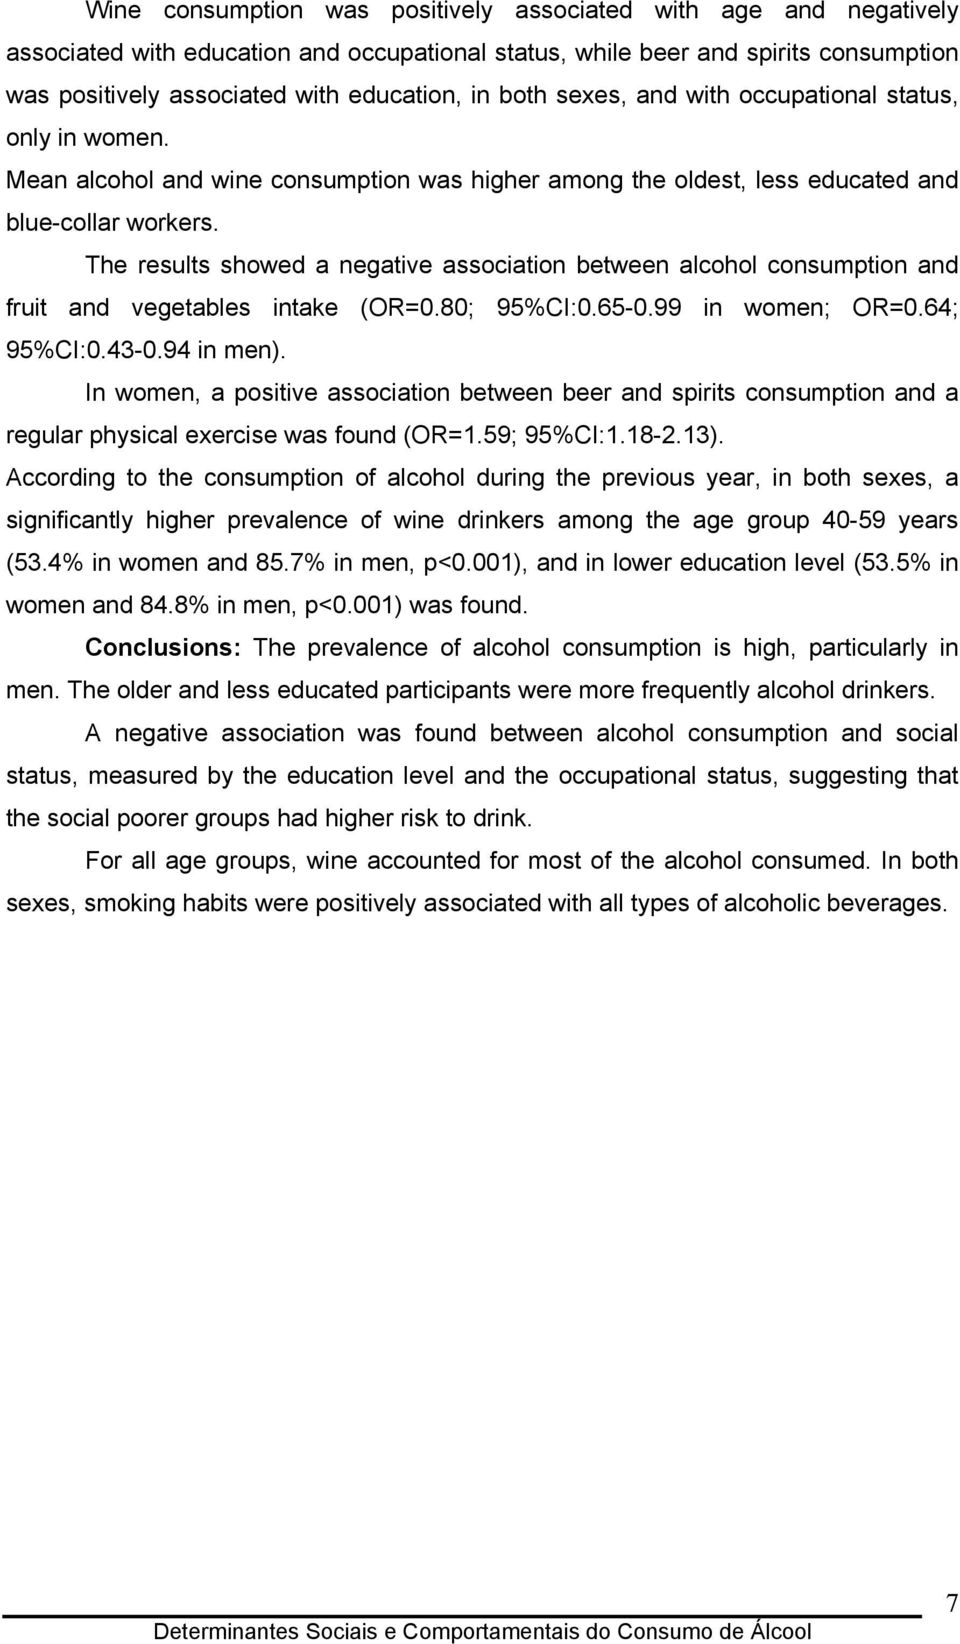 The results showed a negative association between alcohol consumption and fruit and vegetables intake (OR=0.80; 95%CI:0.65-0.99 in women; OR=0.64; 95%CI:0.43-0.94 in men).